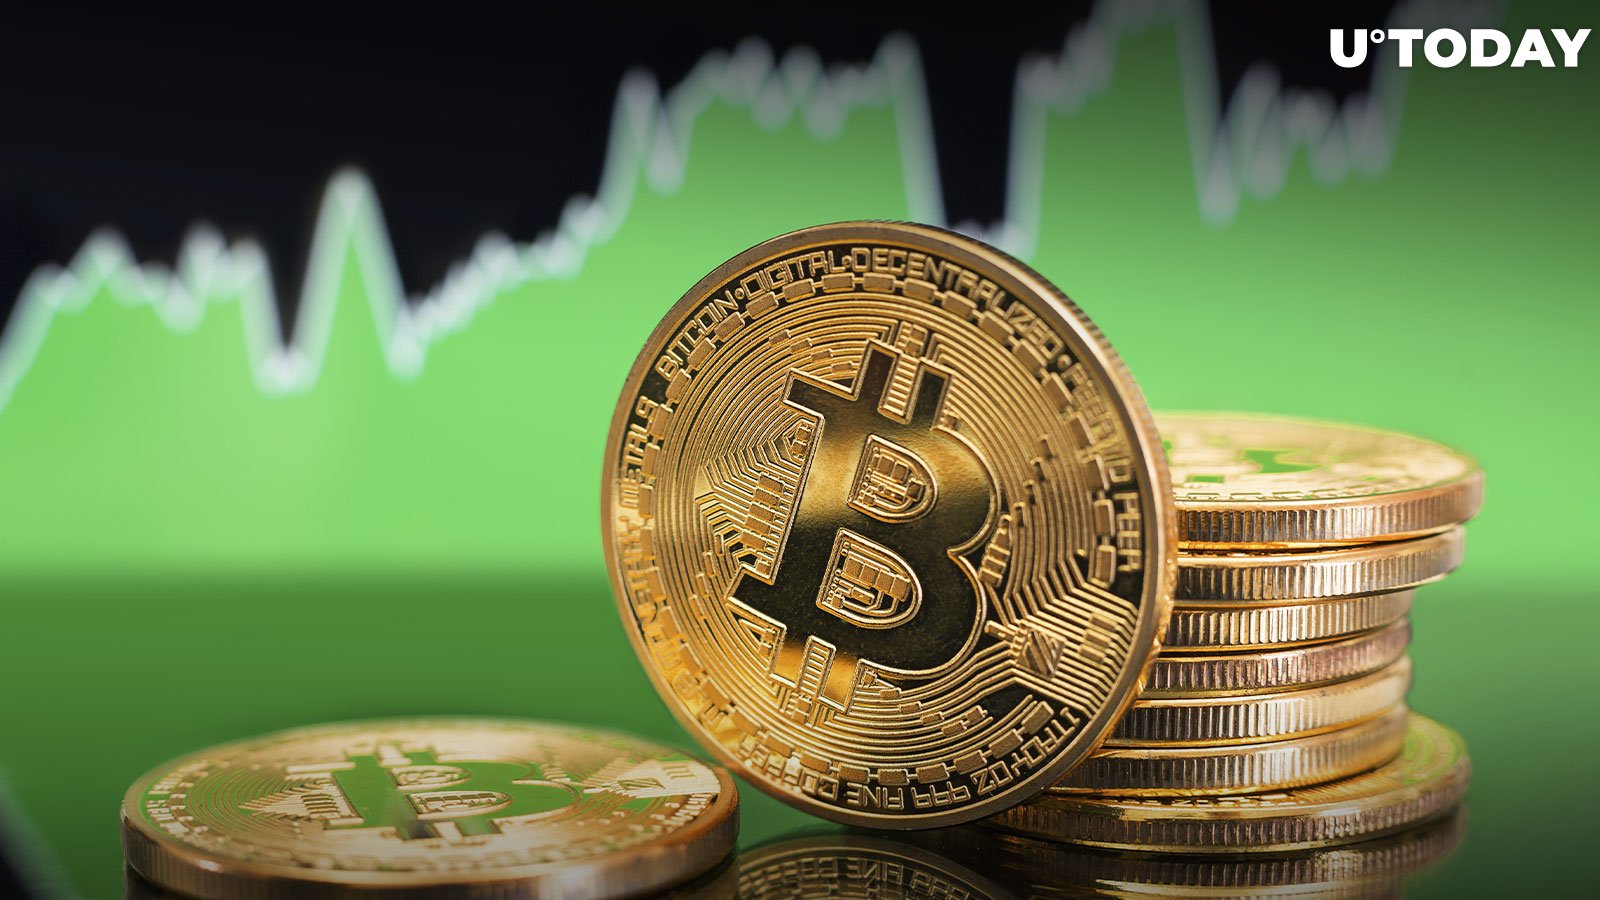 Bitcoin Suddenly Surges 6% in Minutes, Here's Why